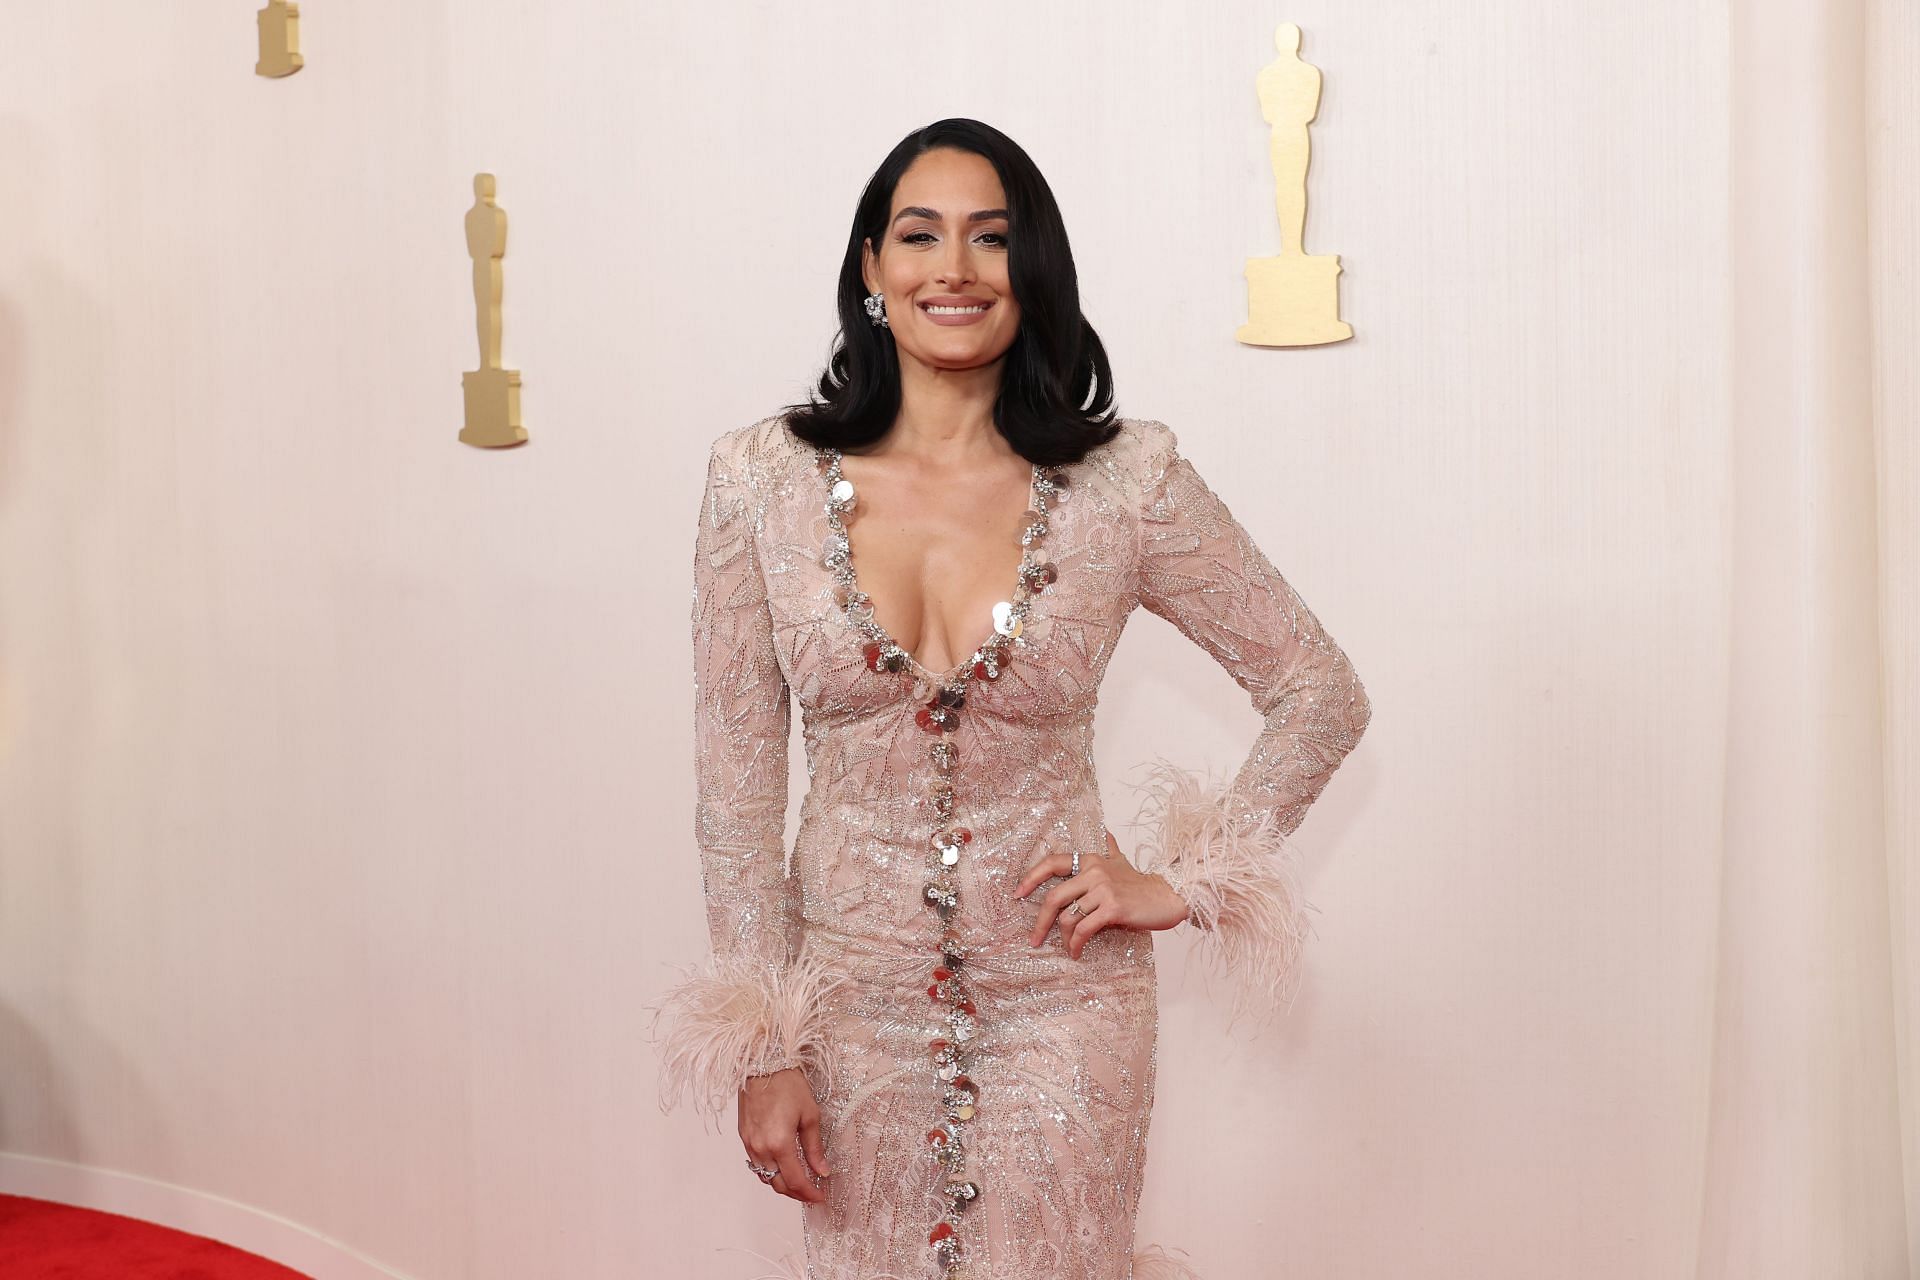 Nikki at the 96th Annual Academy Awards - Arrivals (Image via Getty Images)